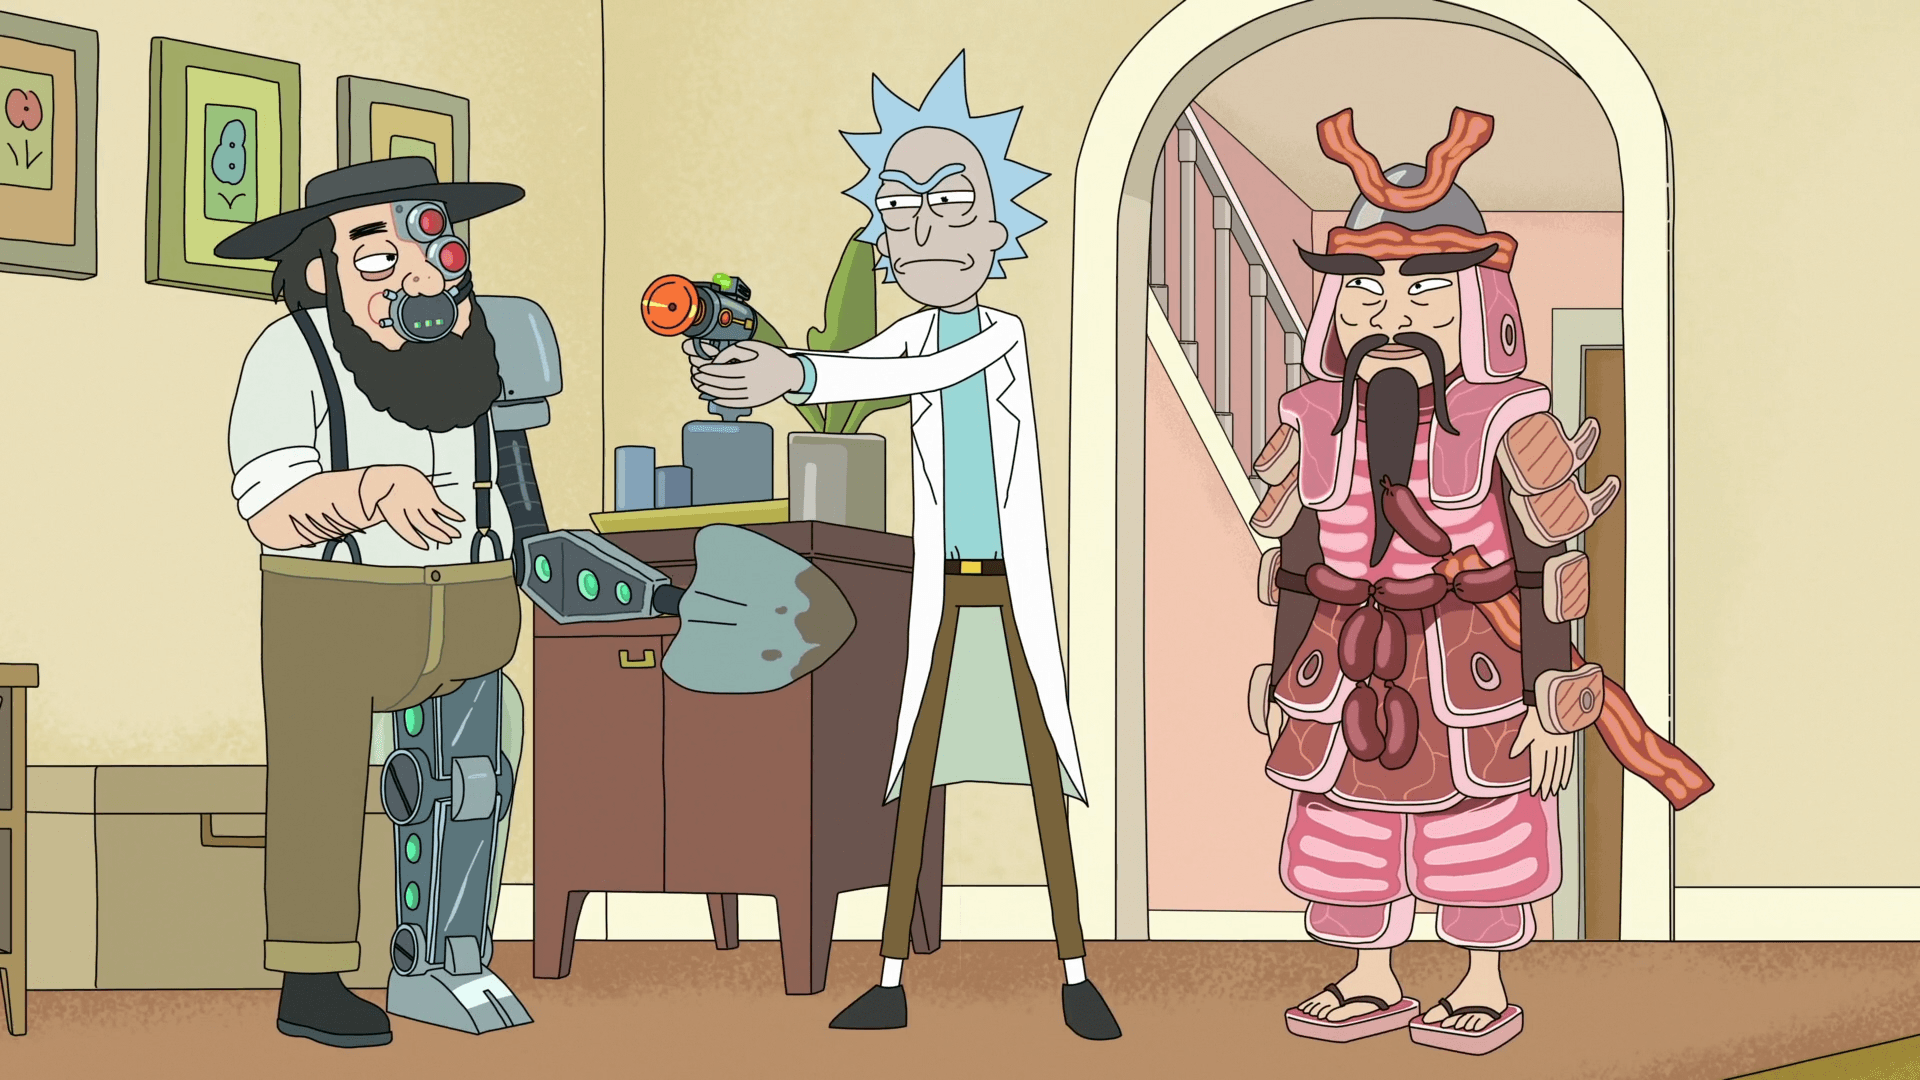 Rick and Morty_02 (Duel Monitor Wallpaper) by MikeAGar85 on Newgrounds